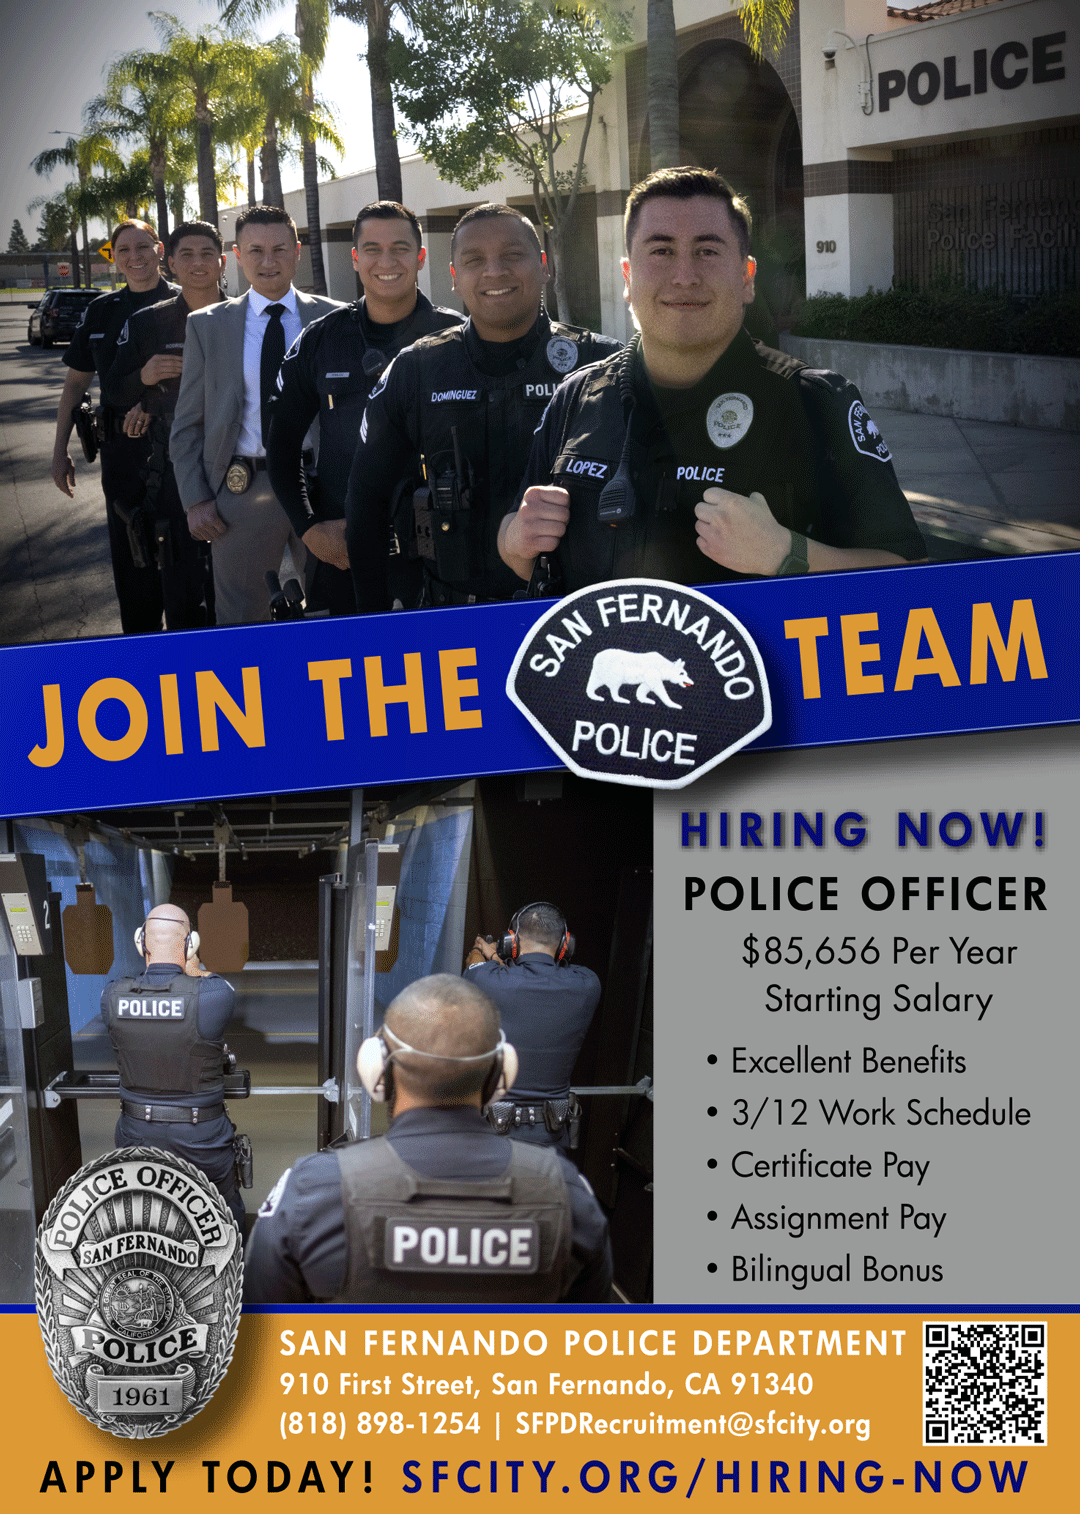 photo of various ranking officers standing behind each other in front of the San Fernando Police Facility; Join the Team; San Fernando Police Patch; photo of three officers practicing in the shooting range; San Fernando Police Officer badge; hiring now! Police Officer $85,656 starting salary; excellent benefits; 3/12 work schedule; certificate pay; assignment pay; bilingual bonus; San Fernando Police Department 910 First Street, San Fernando, CA 91340; (818) 898-1254 | SFPD Recruitment@sfcity.org